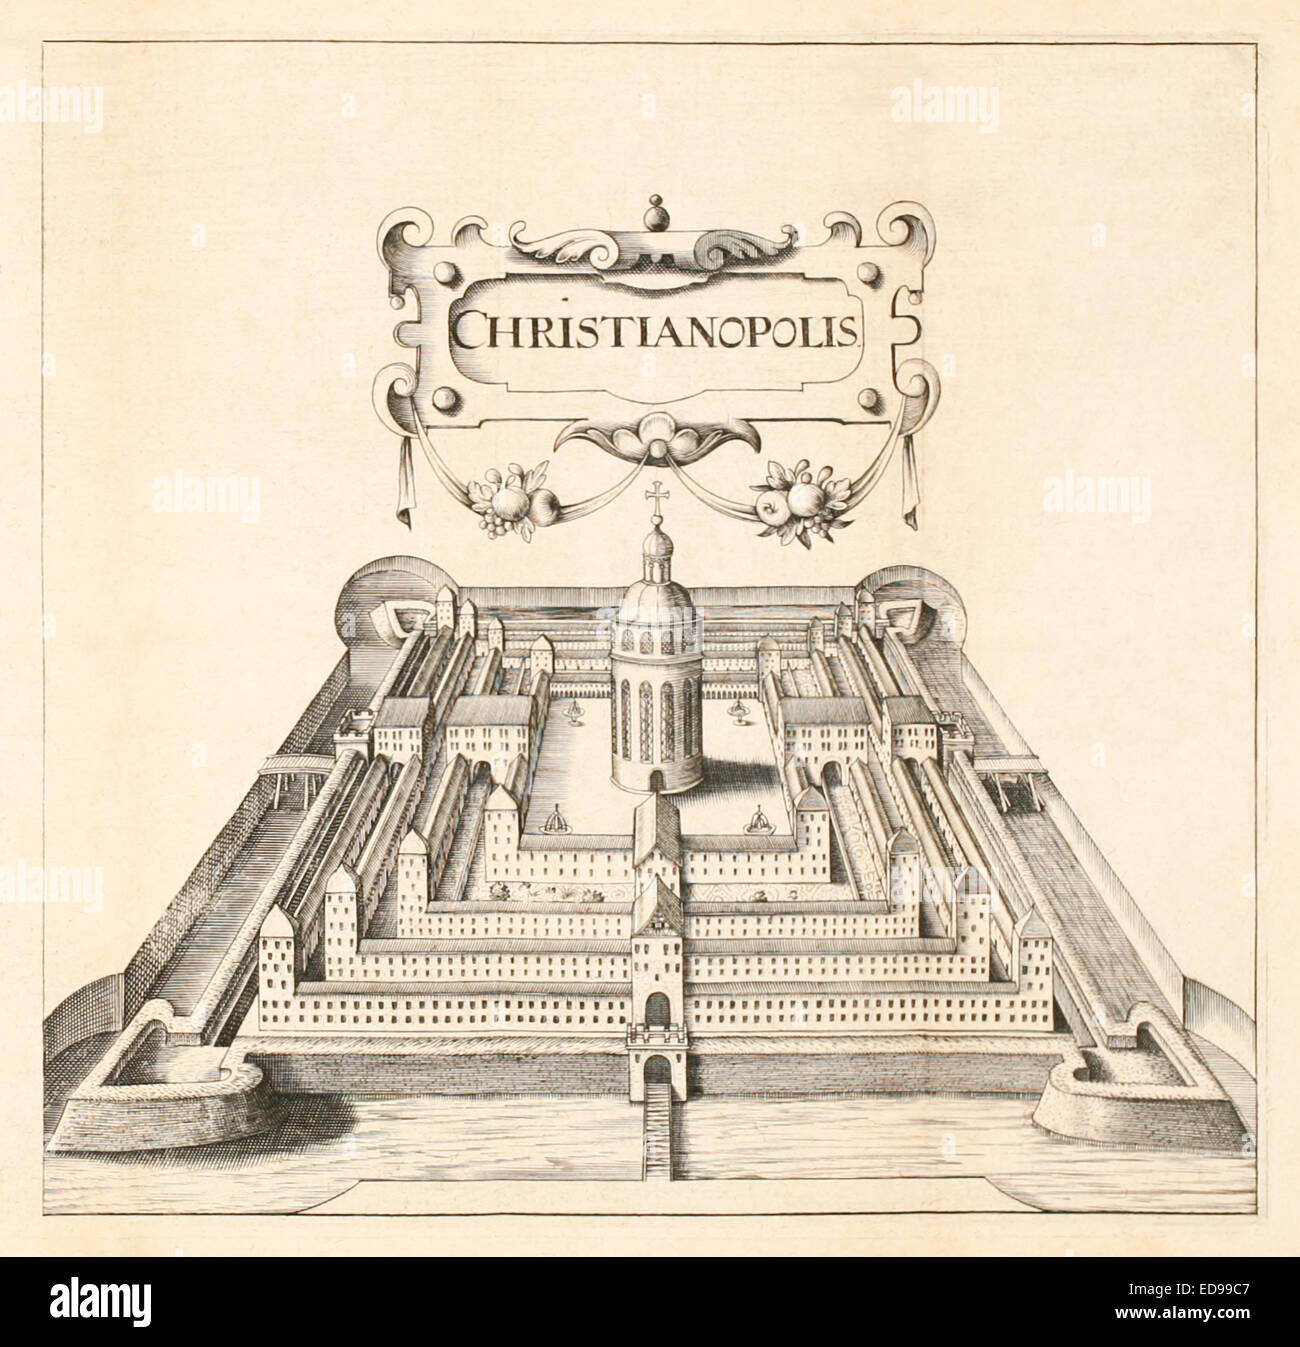 View of Christianopolis from 'Reipublicae Christianopolitanae descriptio' by Johannes Valentinus Andreae (1586-1654) published in 1619. See description for more information. Stock Photo